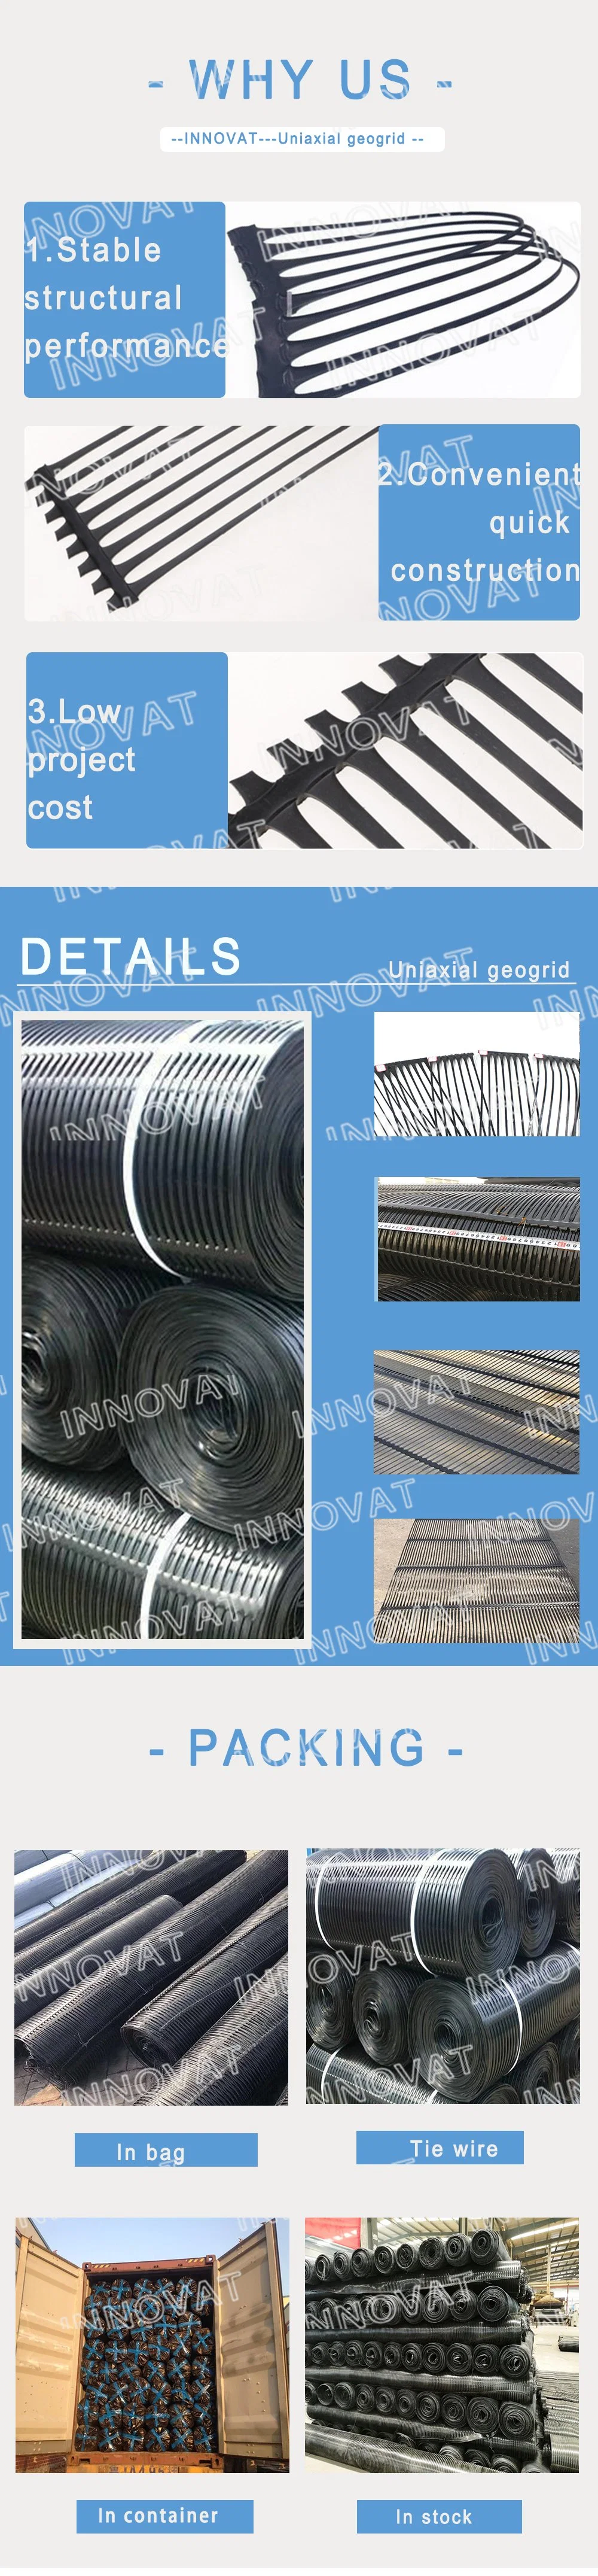 HDPE Uniaxial Plastic Geogrid/ PP Biaxial Geogrid/Two-Way Plastic Geogrid for Earthwork Construction Plastic Mesh Netting